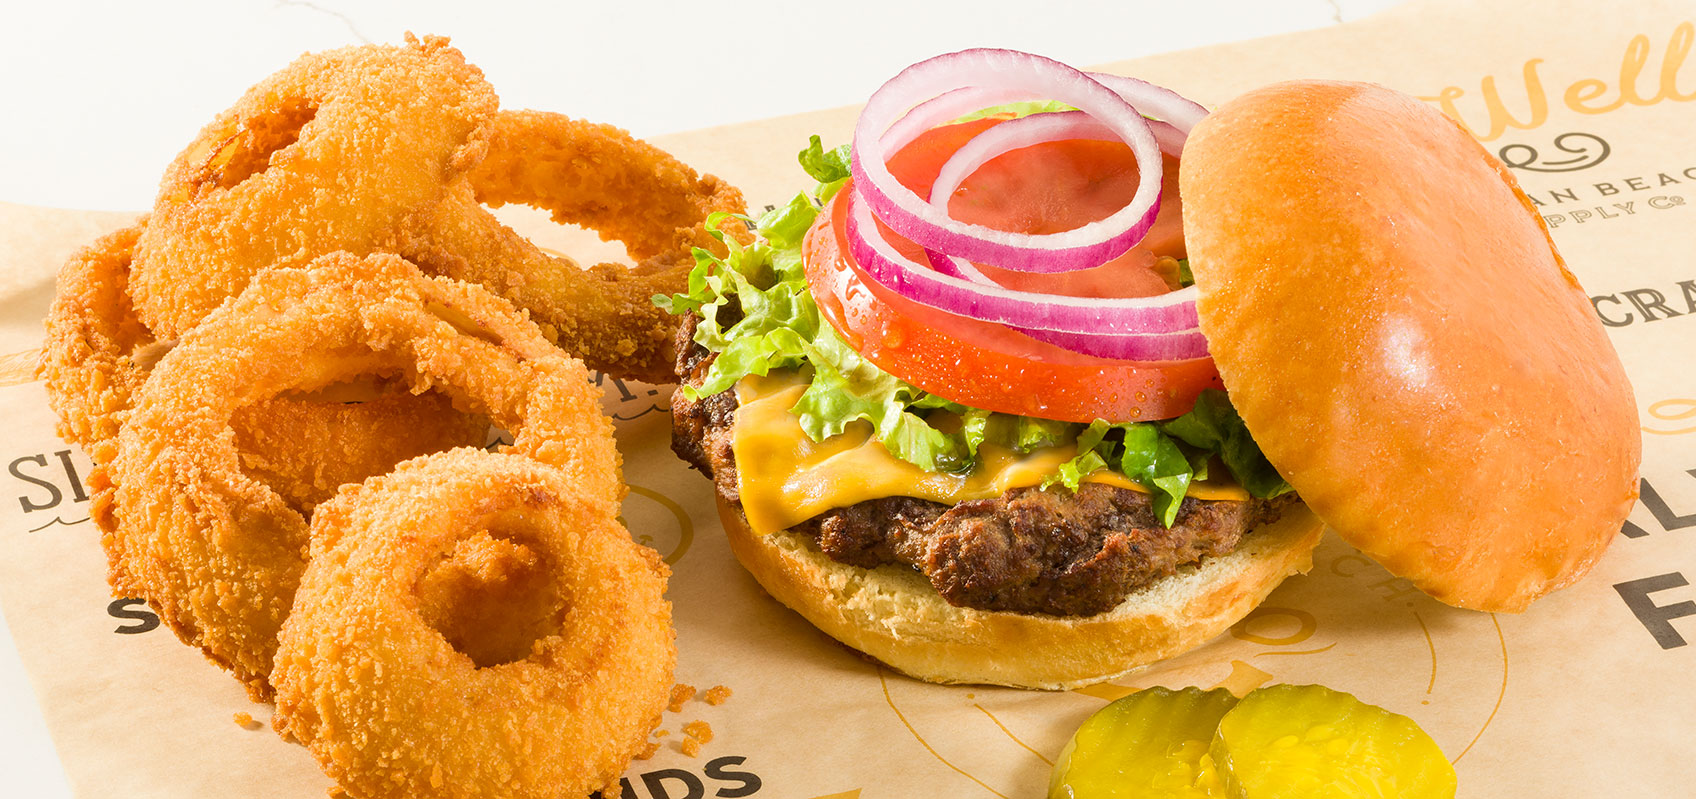 Onion rings and burger with a slice of cheese, onions and beef pattytomato